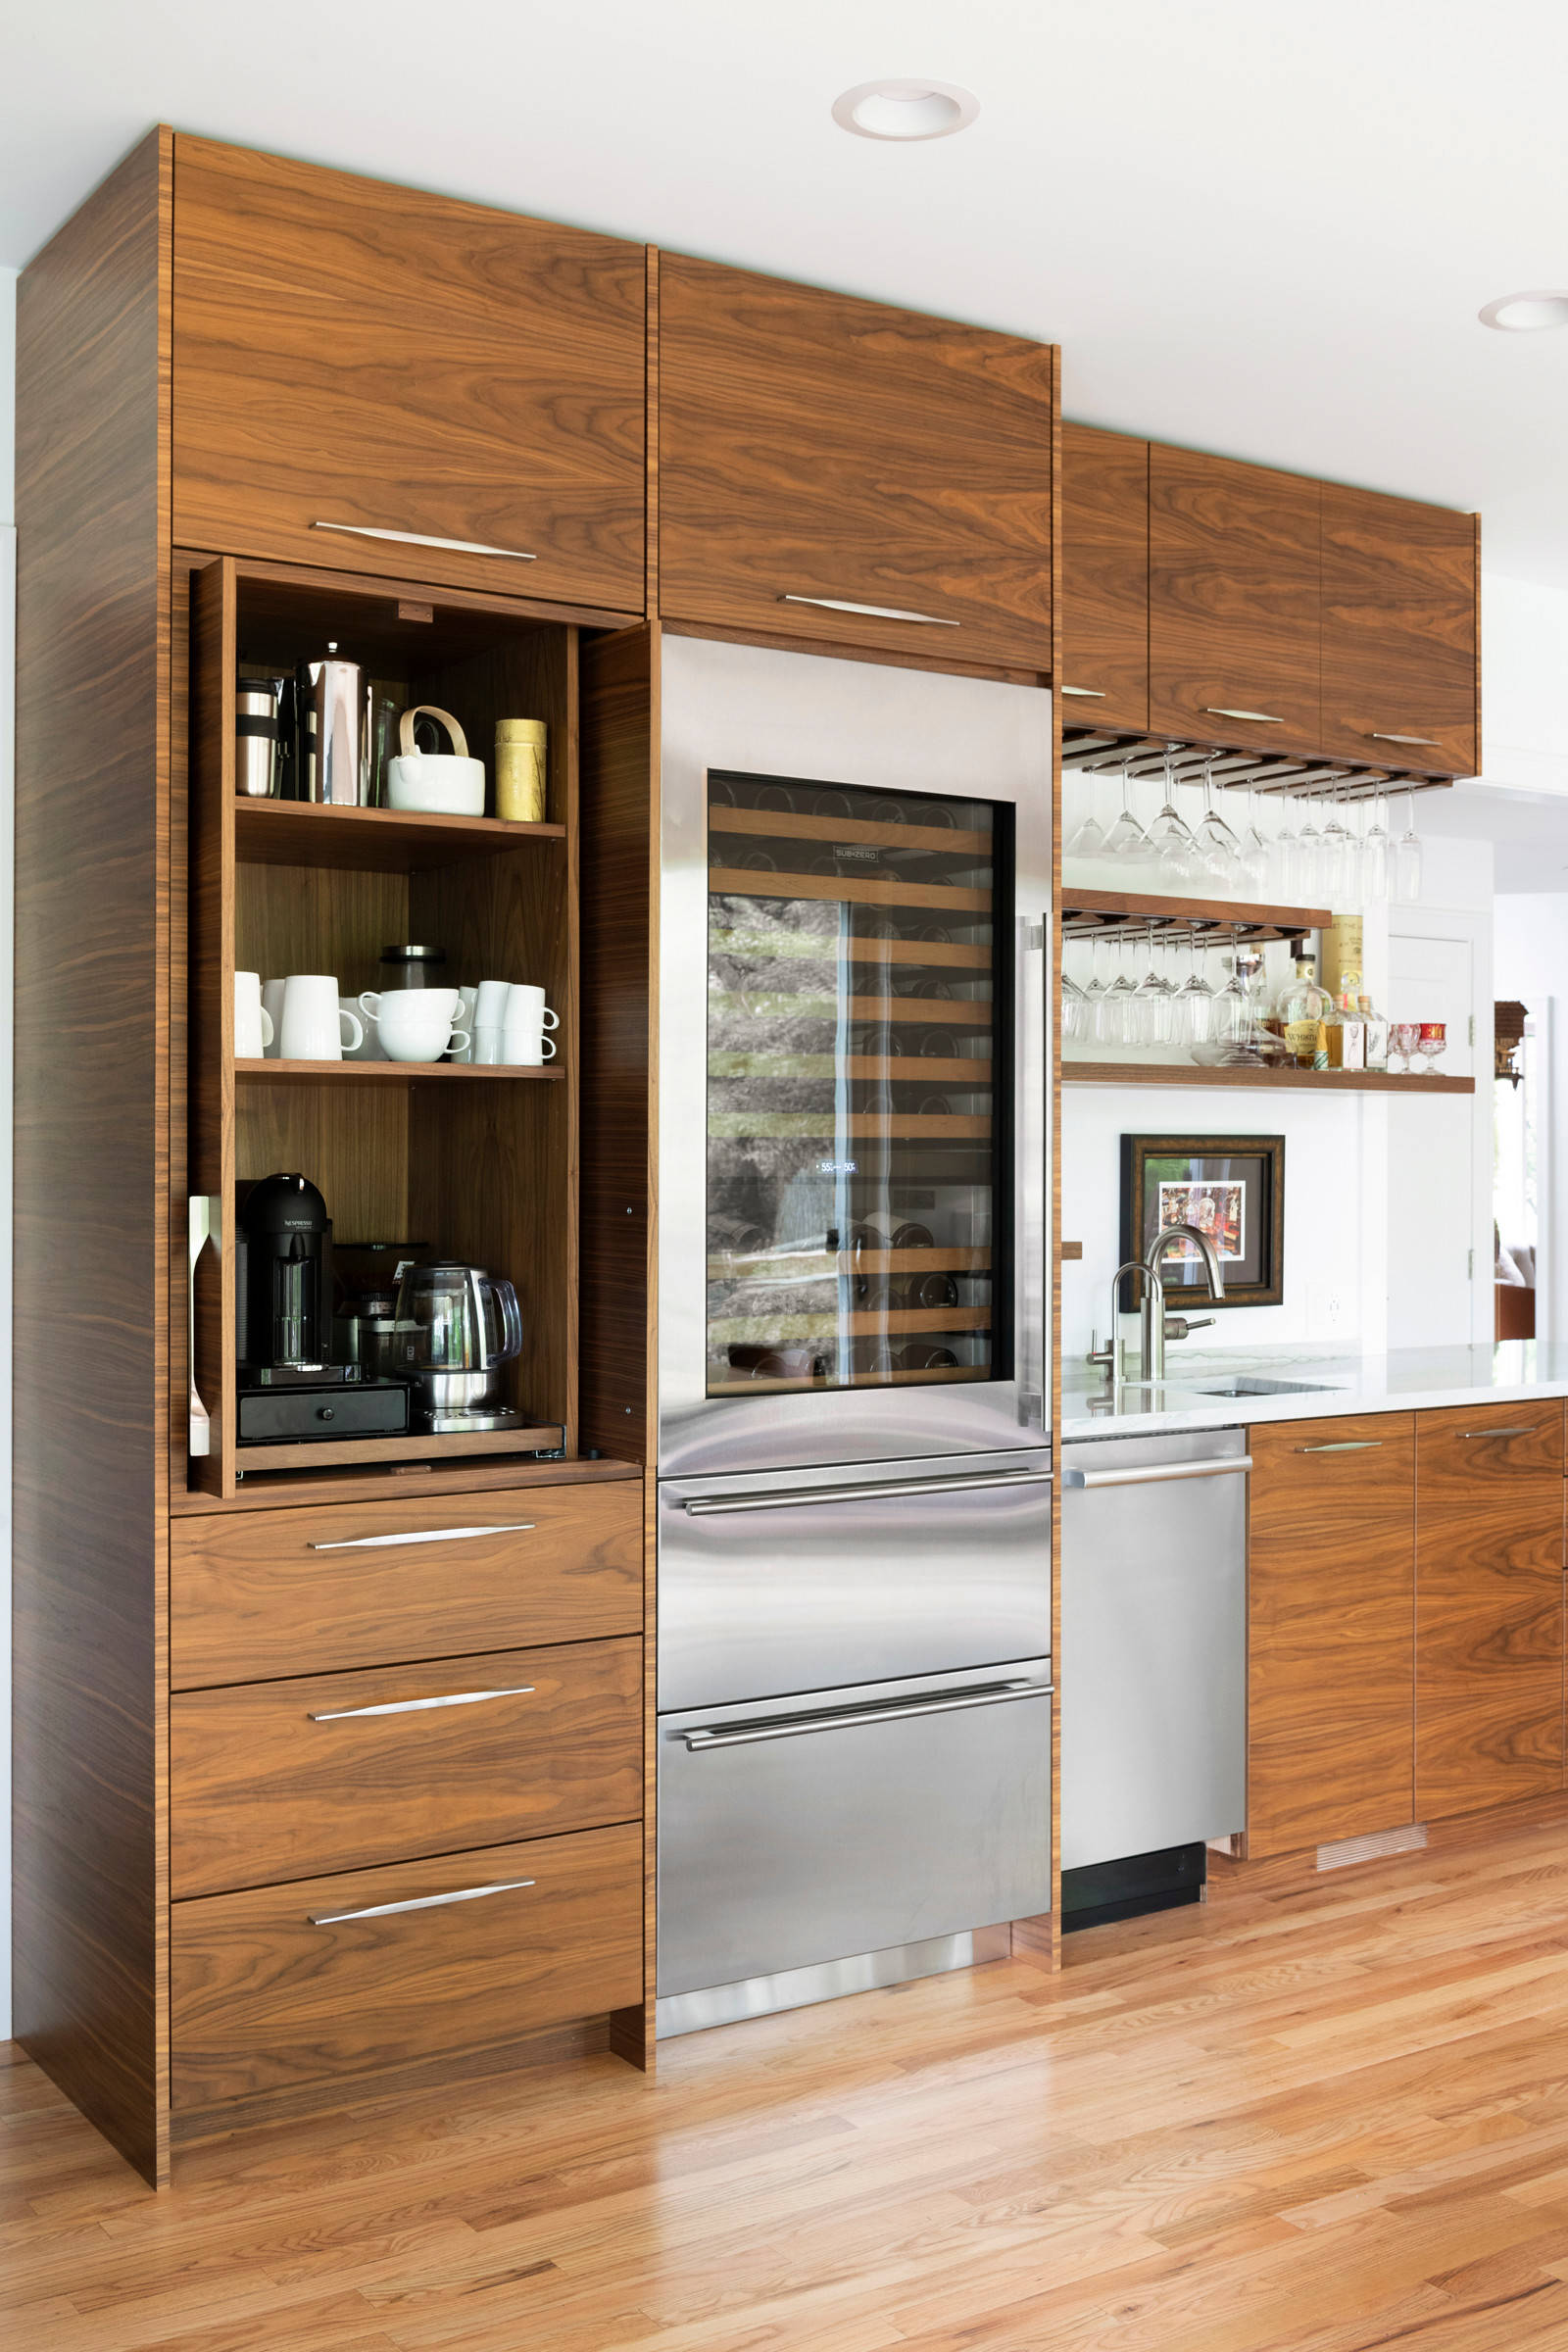 Coffee Bars to Wine Bars: Growing Kitchen Trends – Kitchen and